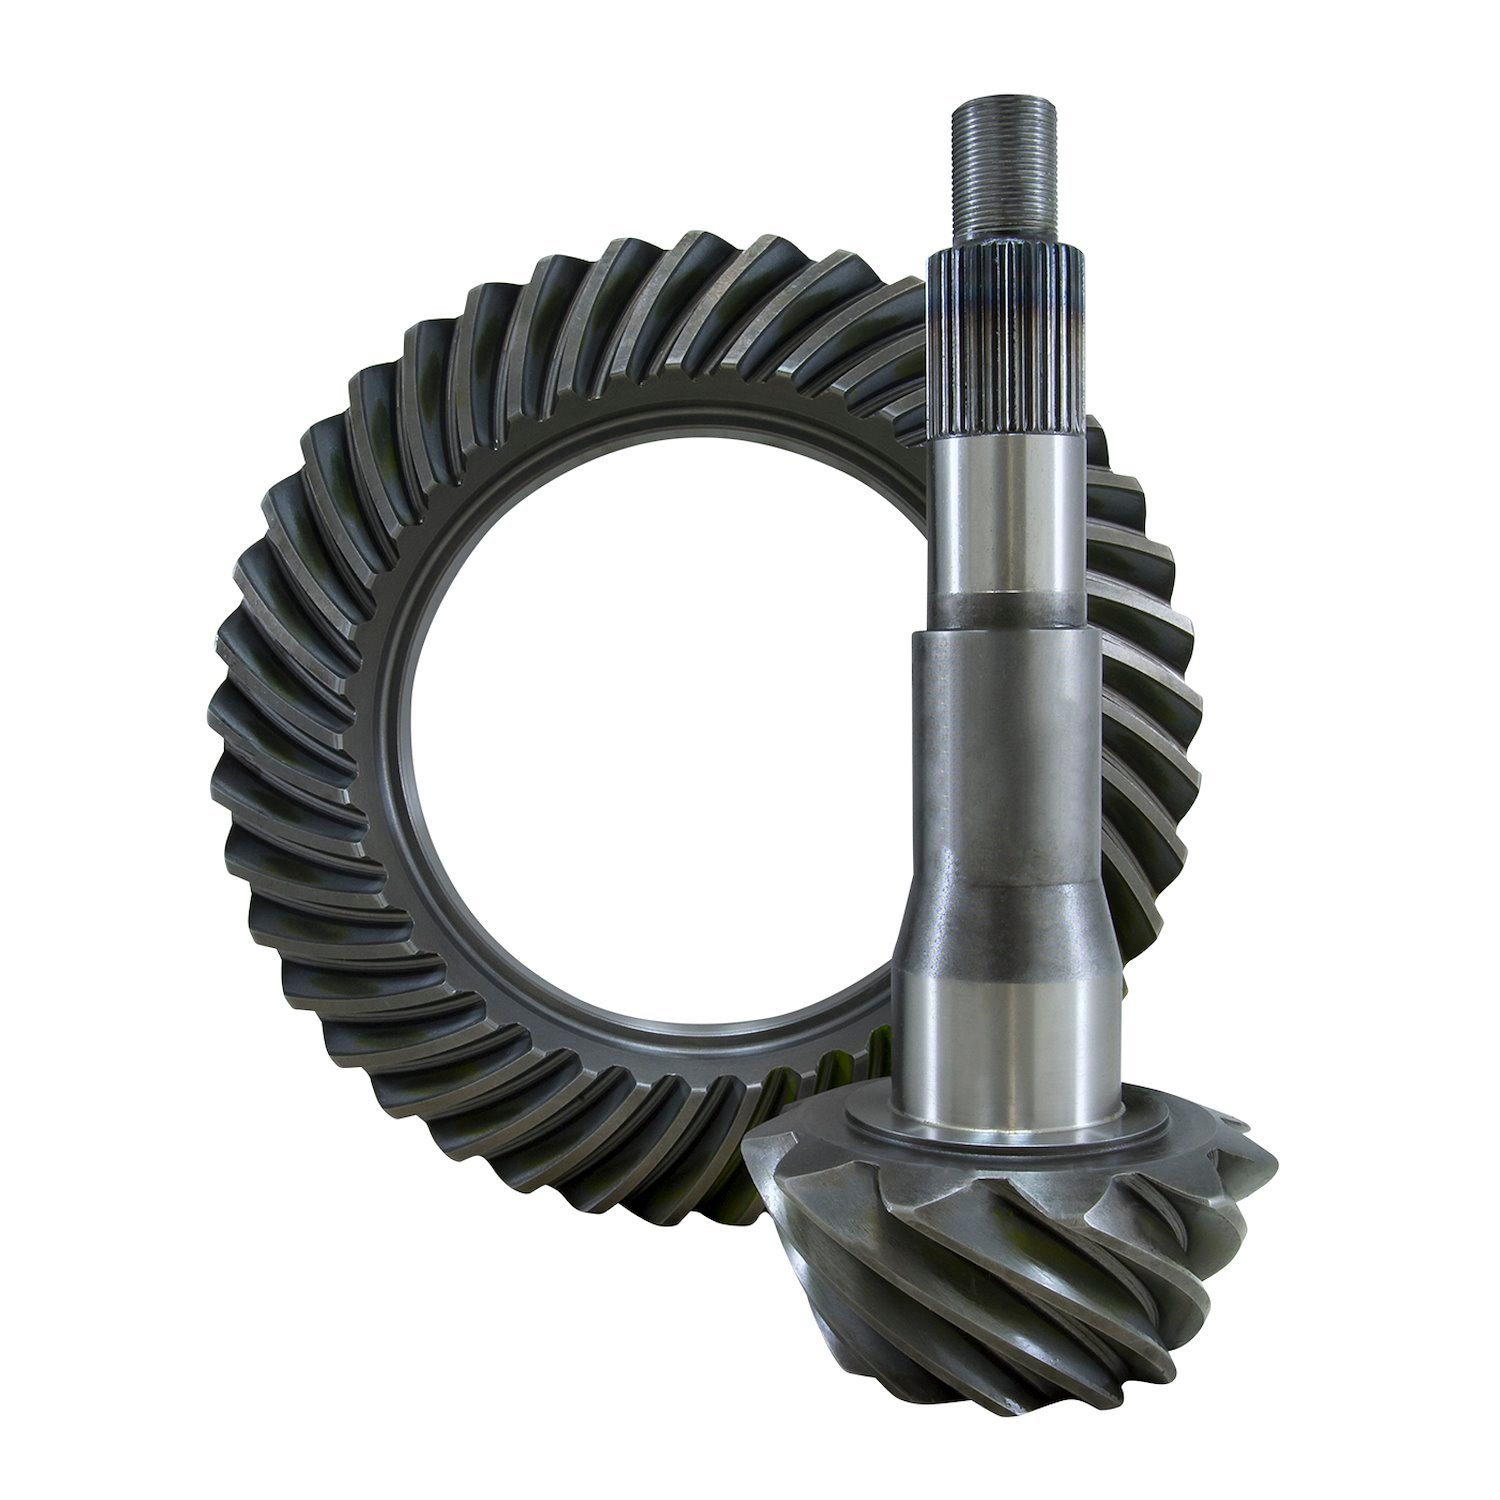 USA Standard 36273 Ring & Pinion Gear Set, For '10 & Down Ford 10.5 in., 3.73 Ratio.